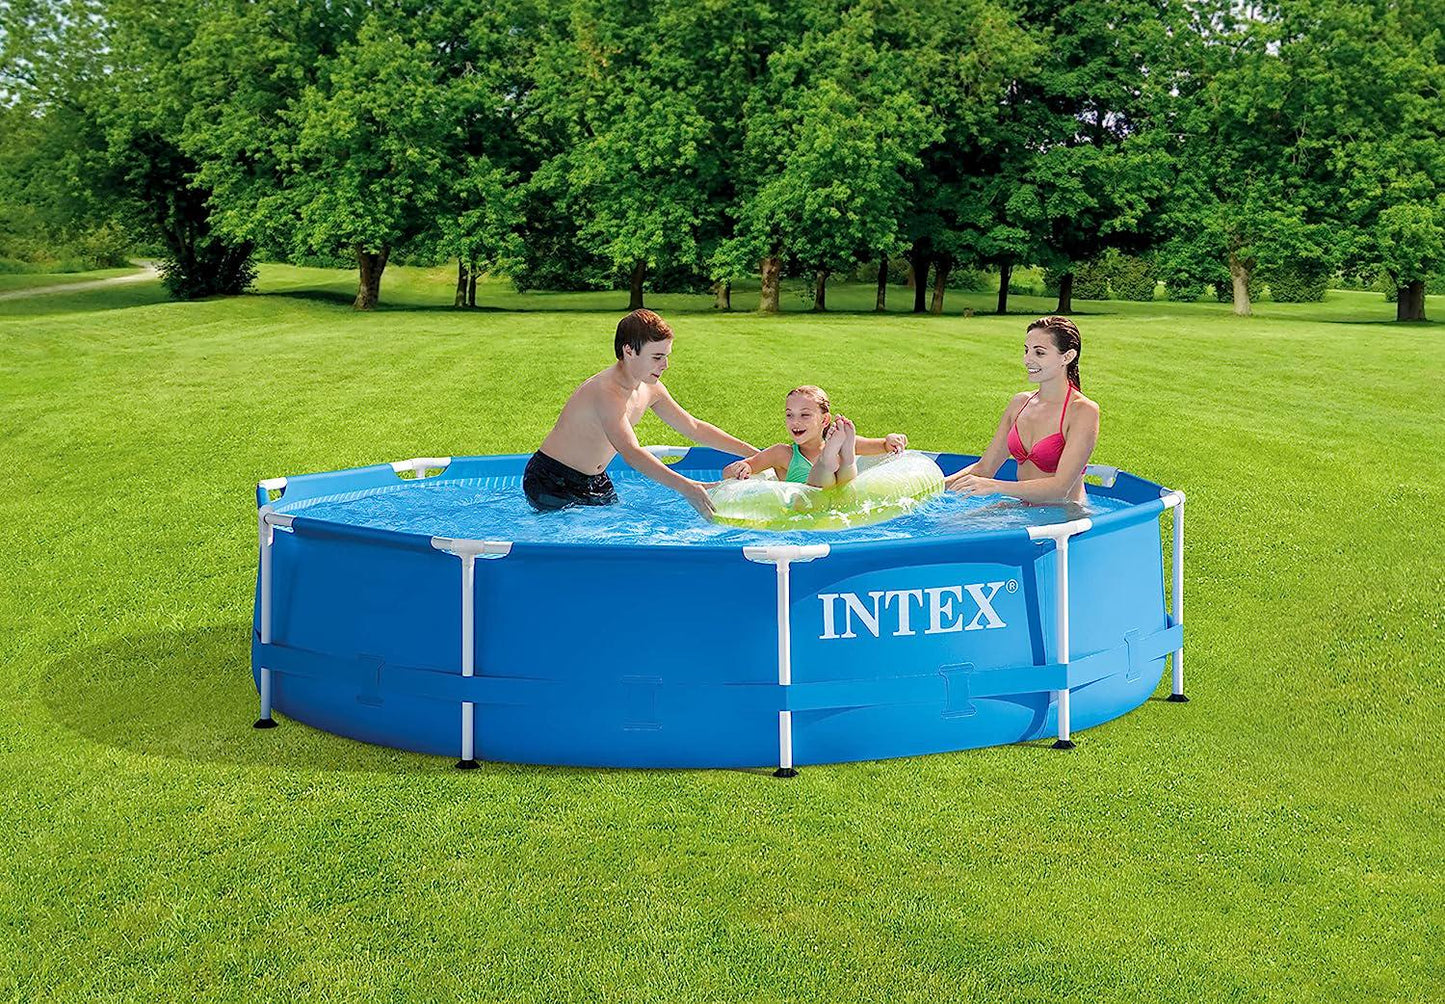 INTEX 28201EH 10ft x 30in Metal Frame Pool with Cartridge Filter Pump for Above-Ground Pool